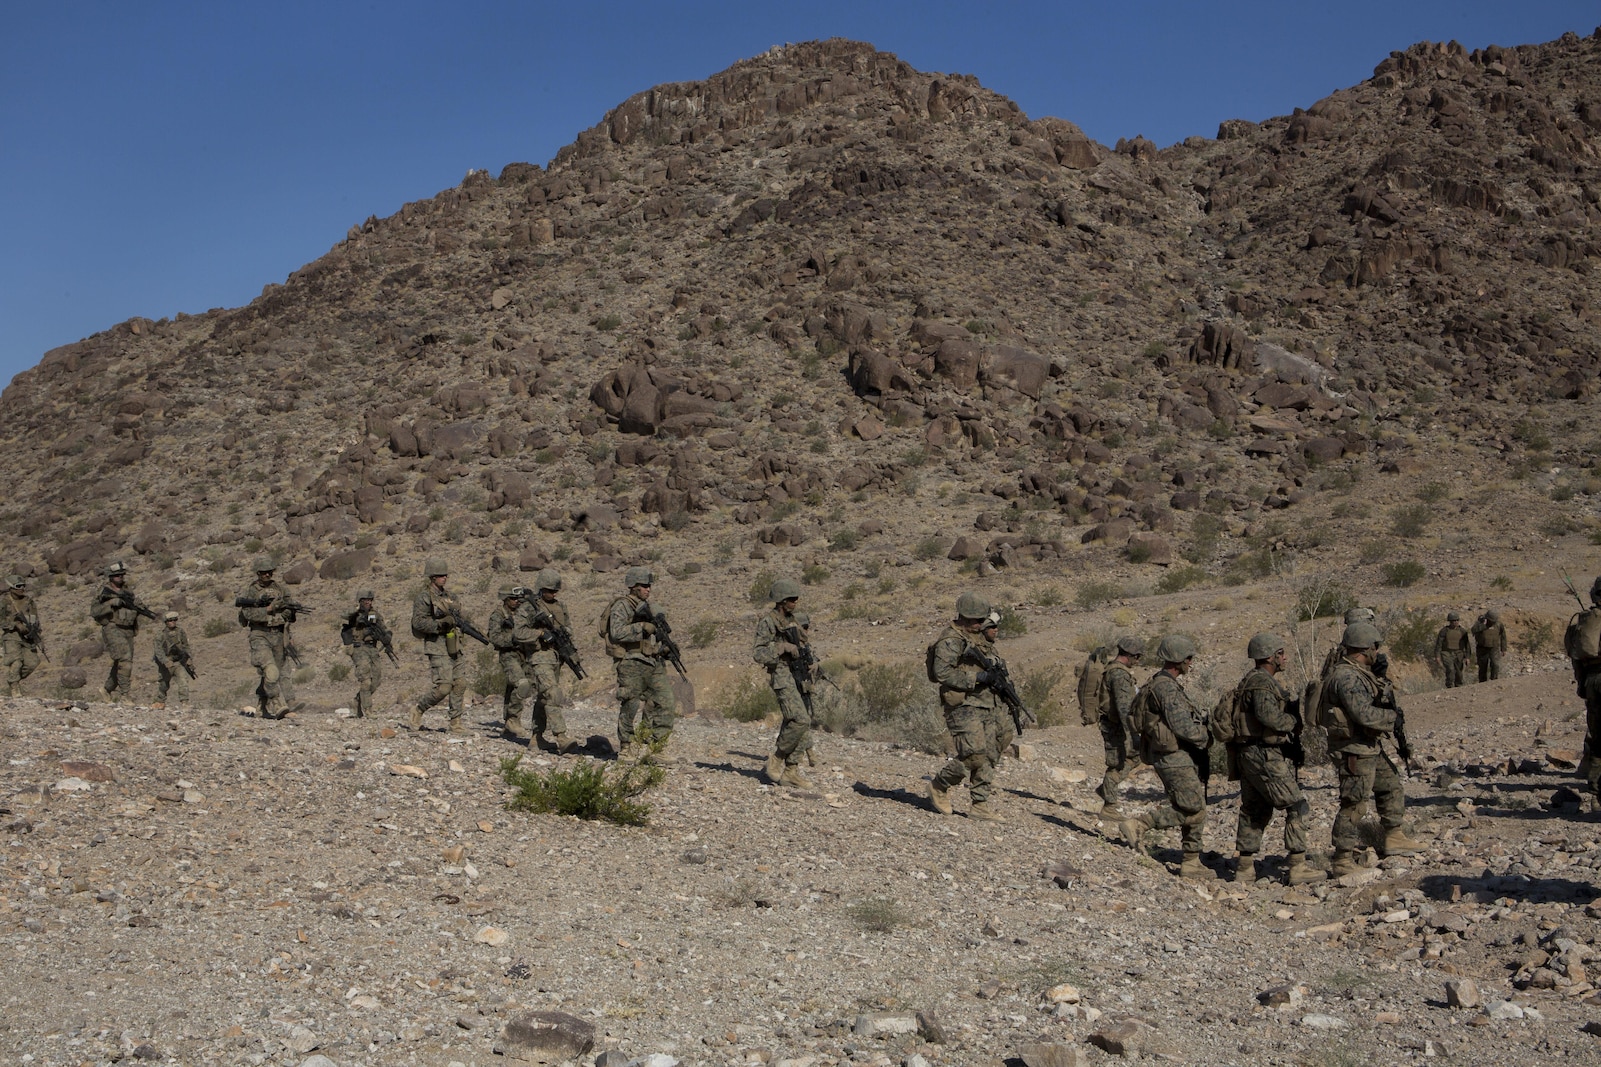 U.S. Marines with Golf Company, 2nd Battalion, 25th Marines, 4th Marine Division, Marine Forces Reserve, hike between objectives at range 400 during Integrated Training Exercise 4-17 at Camp Wilson, Twentynine Palms, California on June 18, 2017. ITX 4-17 is a live-fire and maneuver combined arms exercise designed to train battalion and squadron-sized units in the tactics, techniques, and procedures required to provide a sustainable and ready operational reserve for employment across the full spectrum of crisis and global engagement.